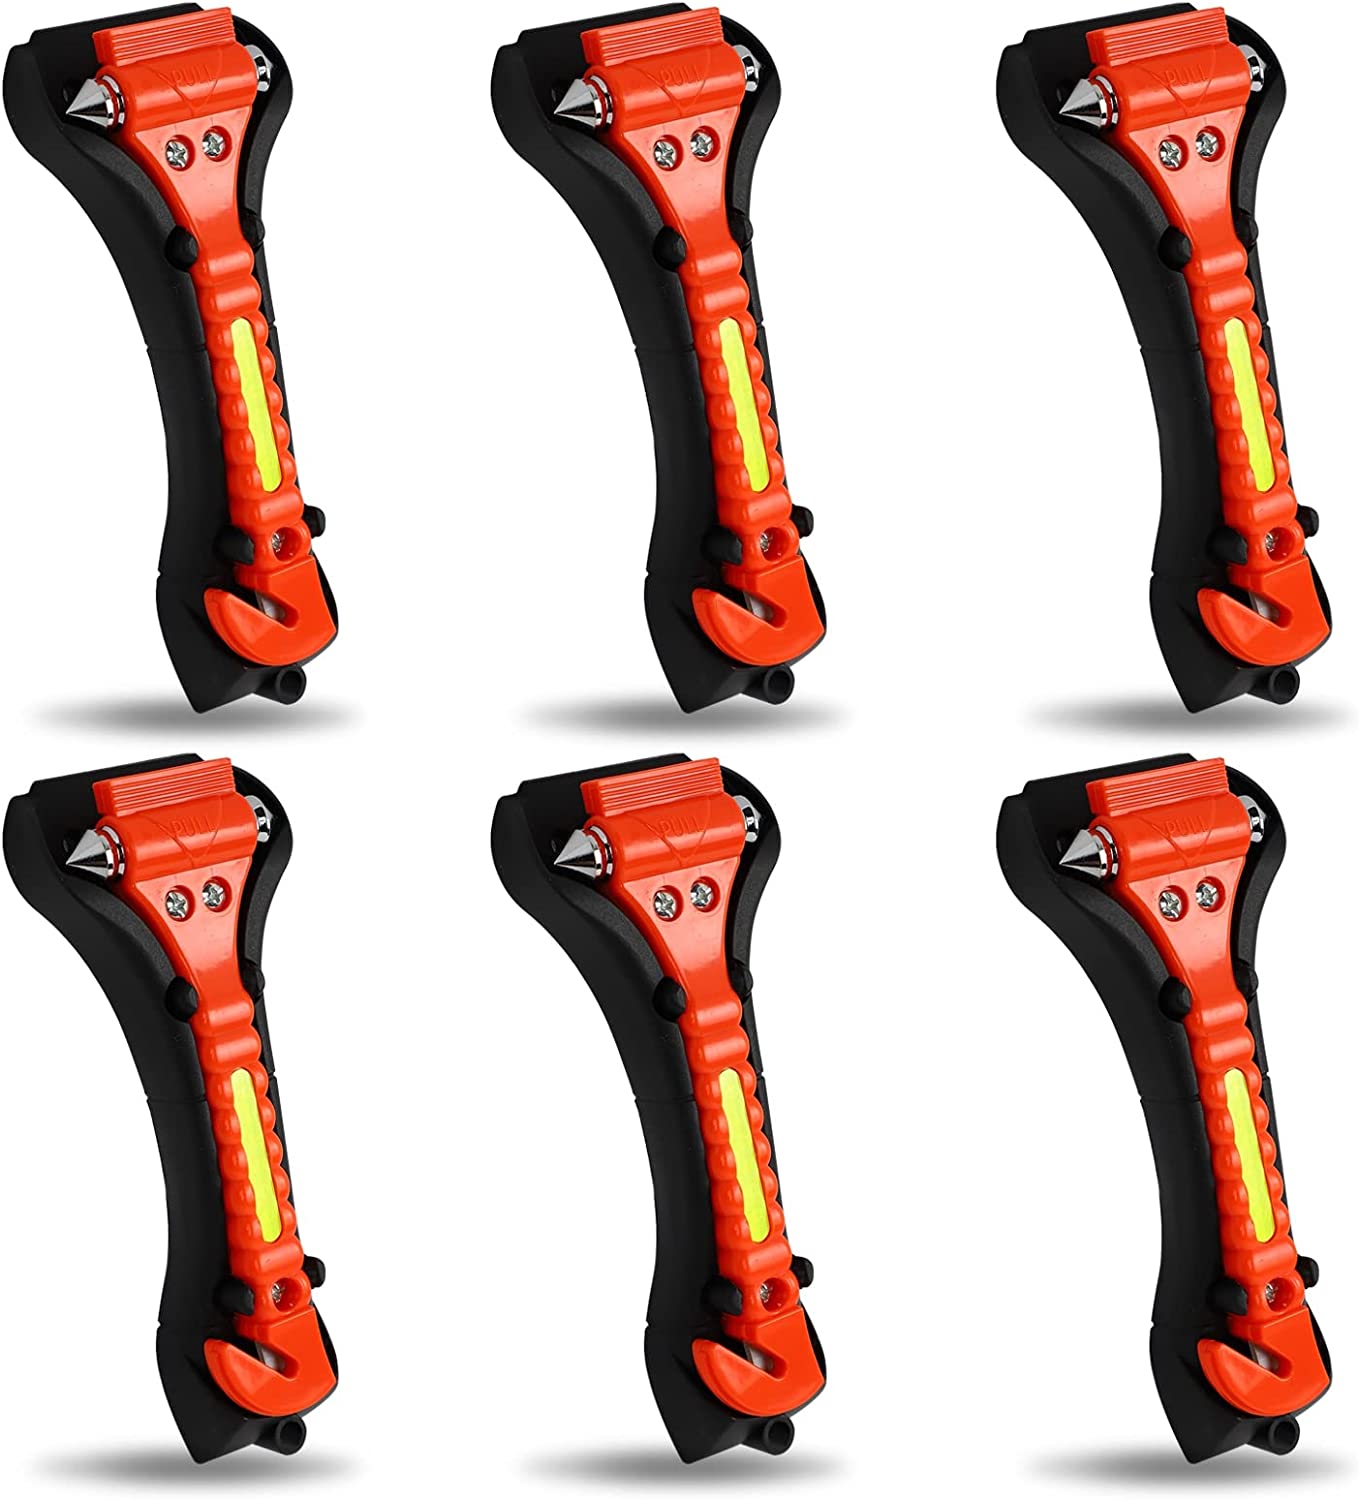 Escape Safety Hammer WholeSale - Price List, Bulk Buy at